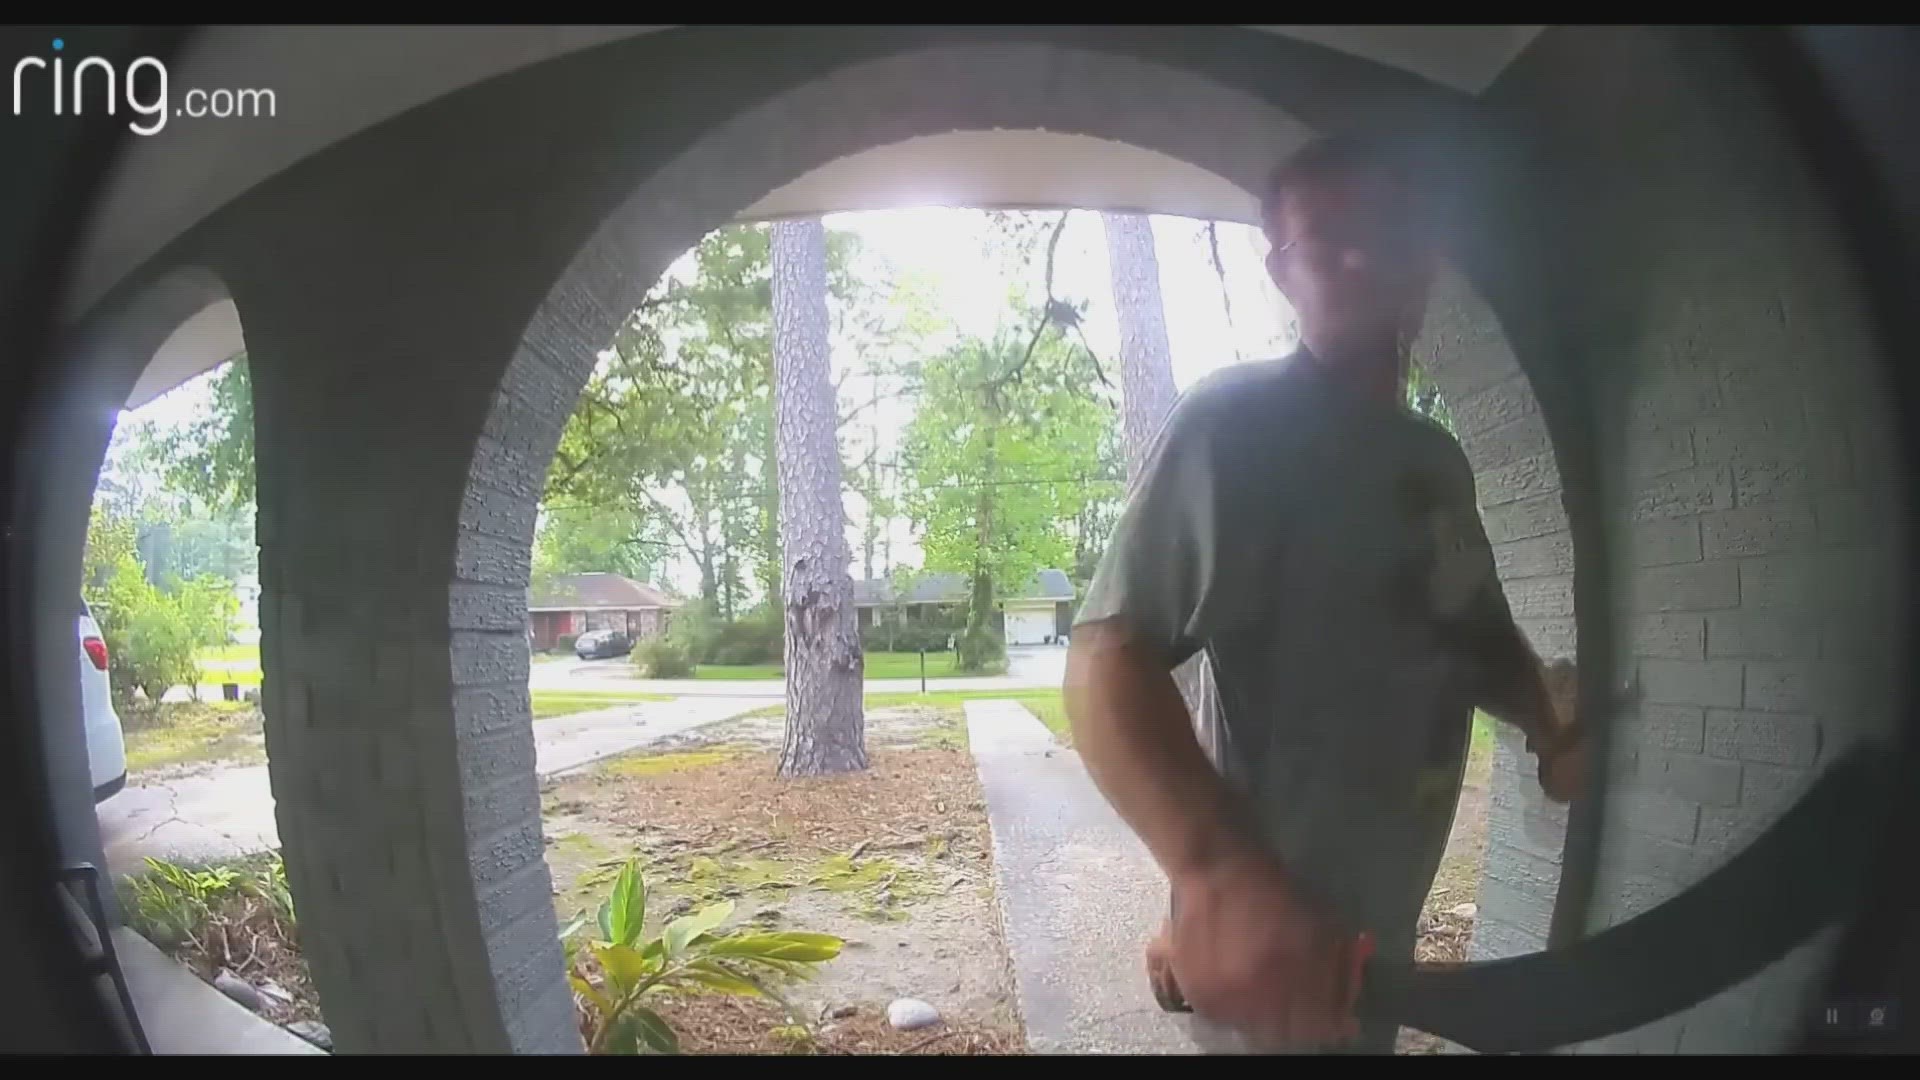 Video shows a man trying to get into a Mandeville home, armed with a machete. It was caught on camera.